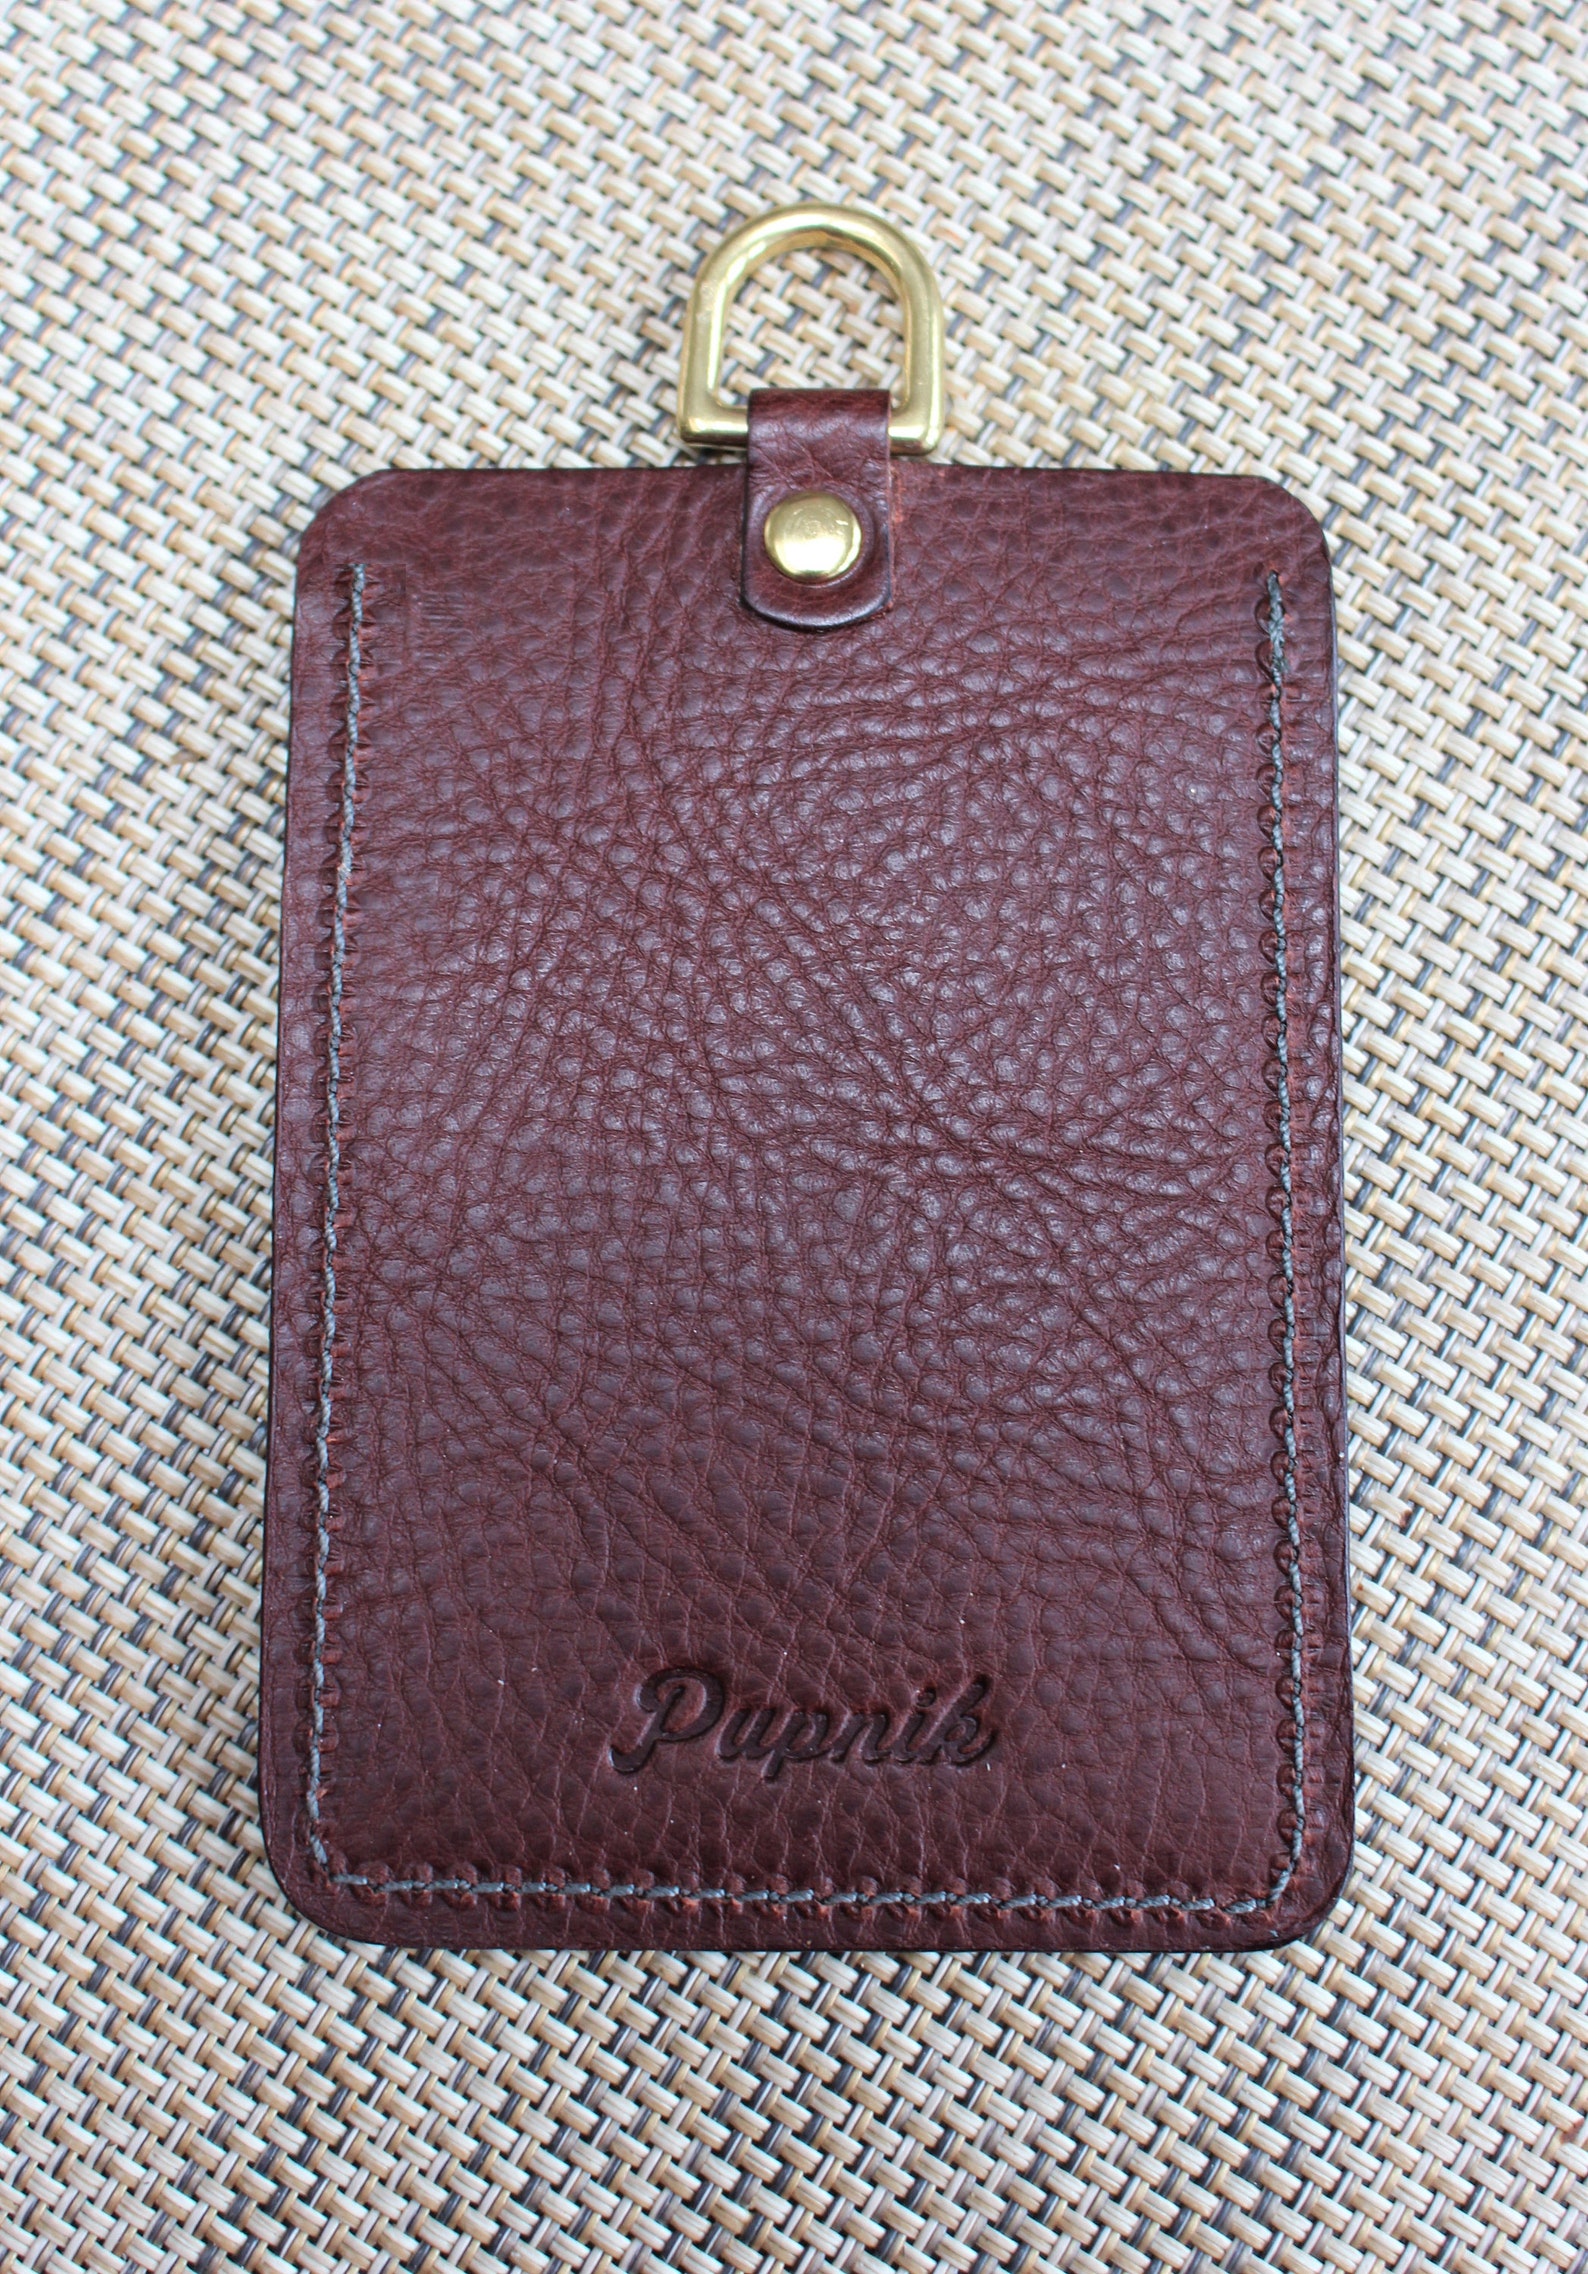 Italian Leather ID Card Holder in Teal and Dark Brown Colours - Etsy